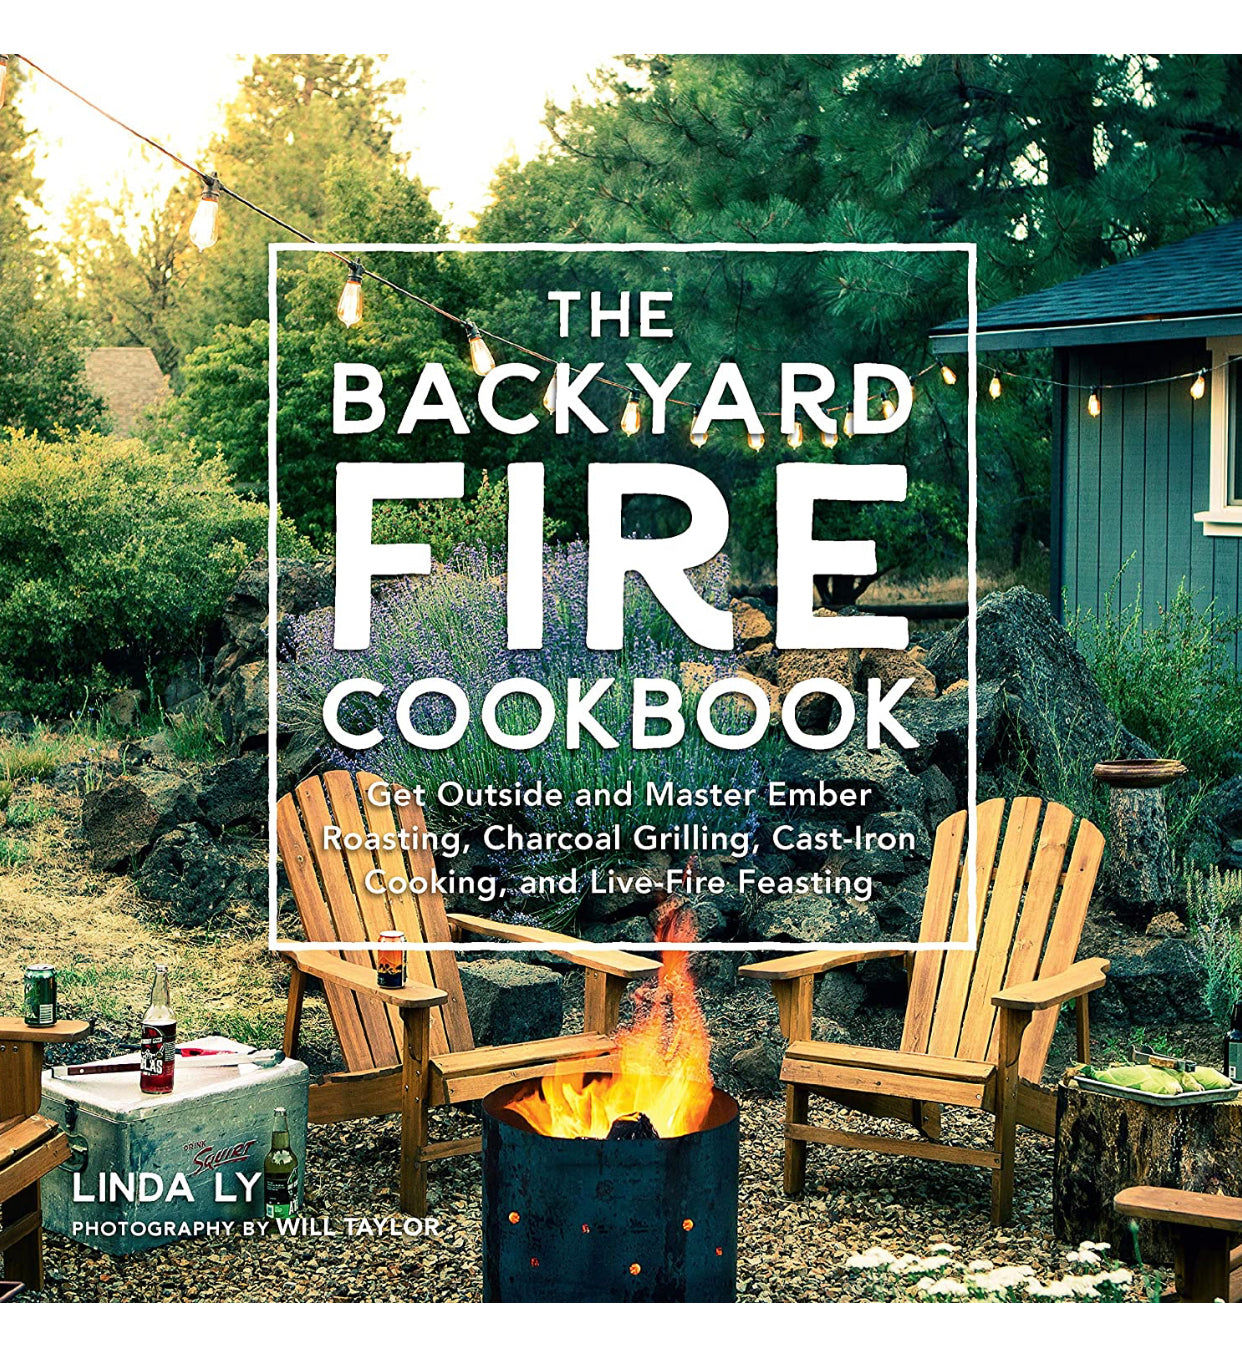 The Back Yard Fire Cook Book